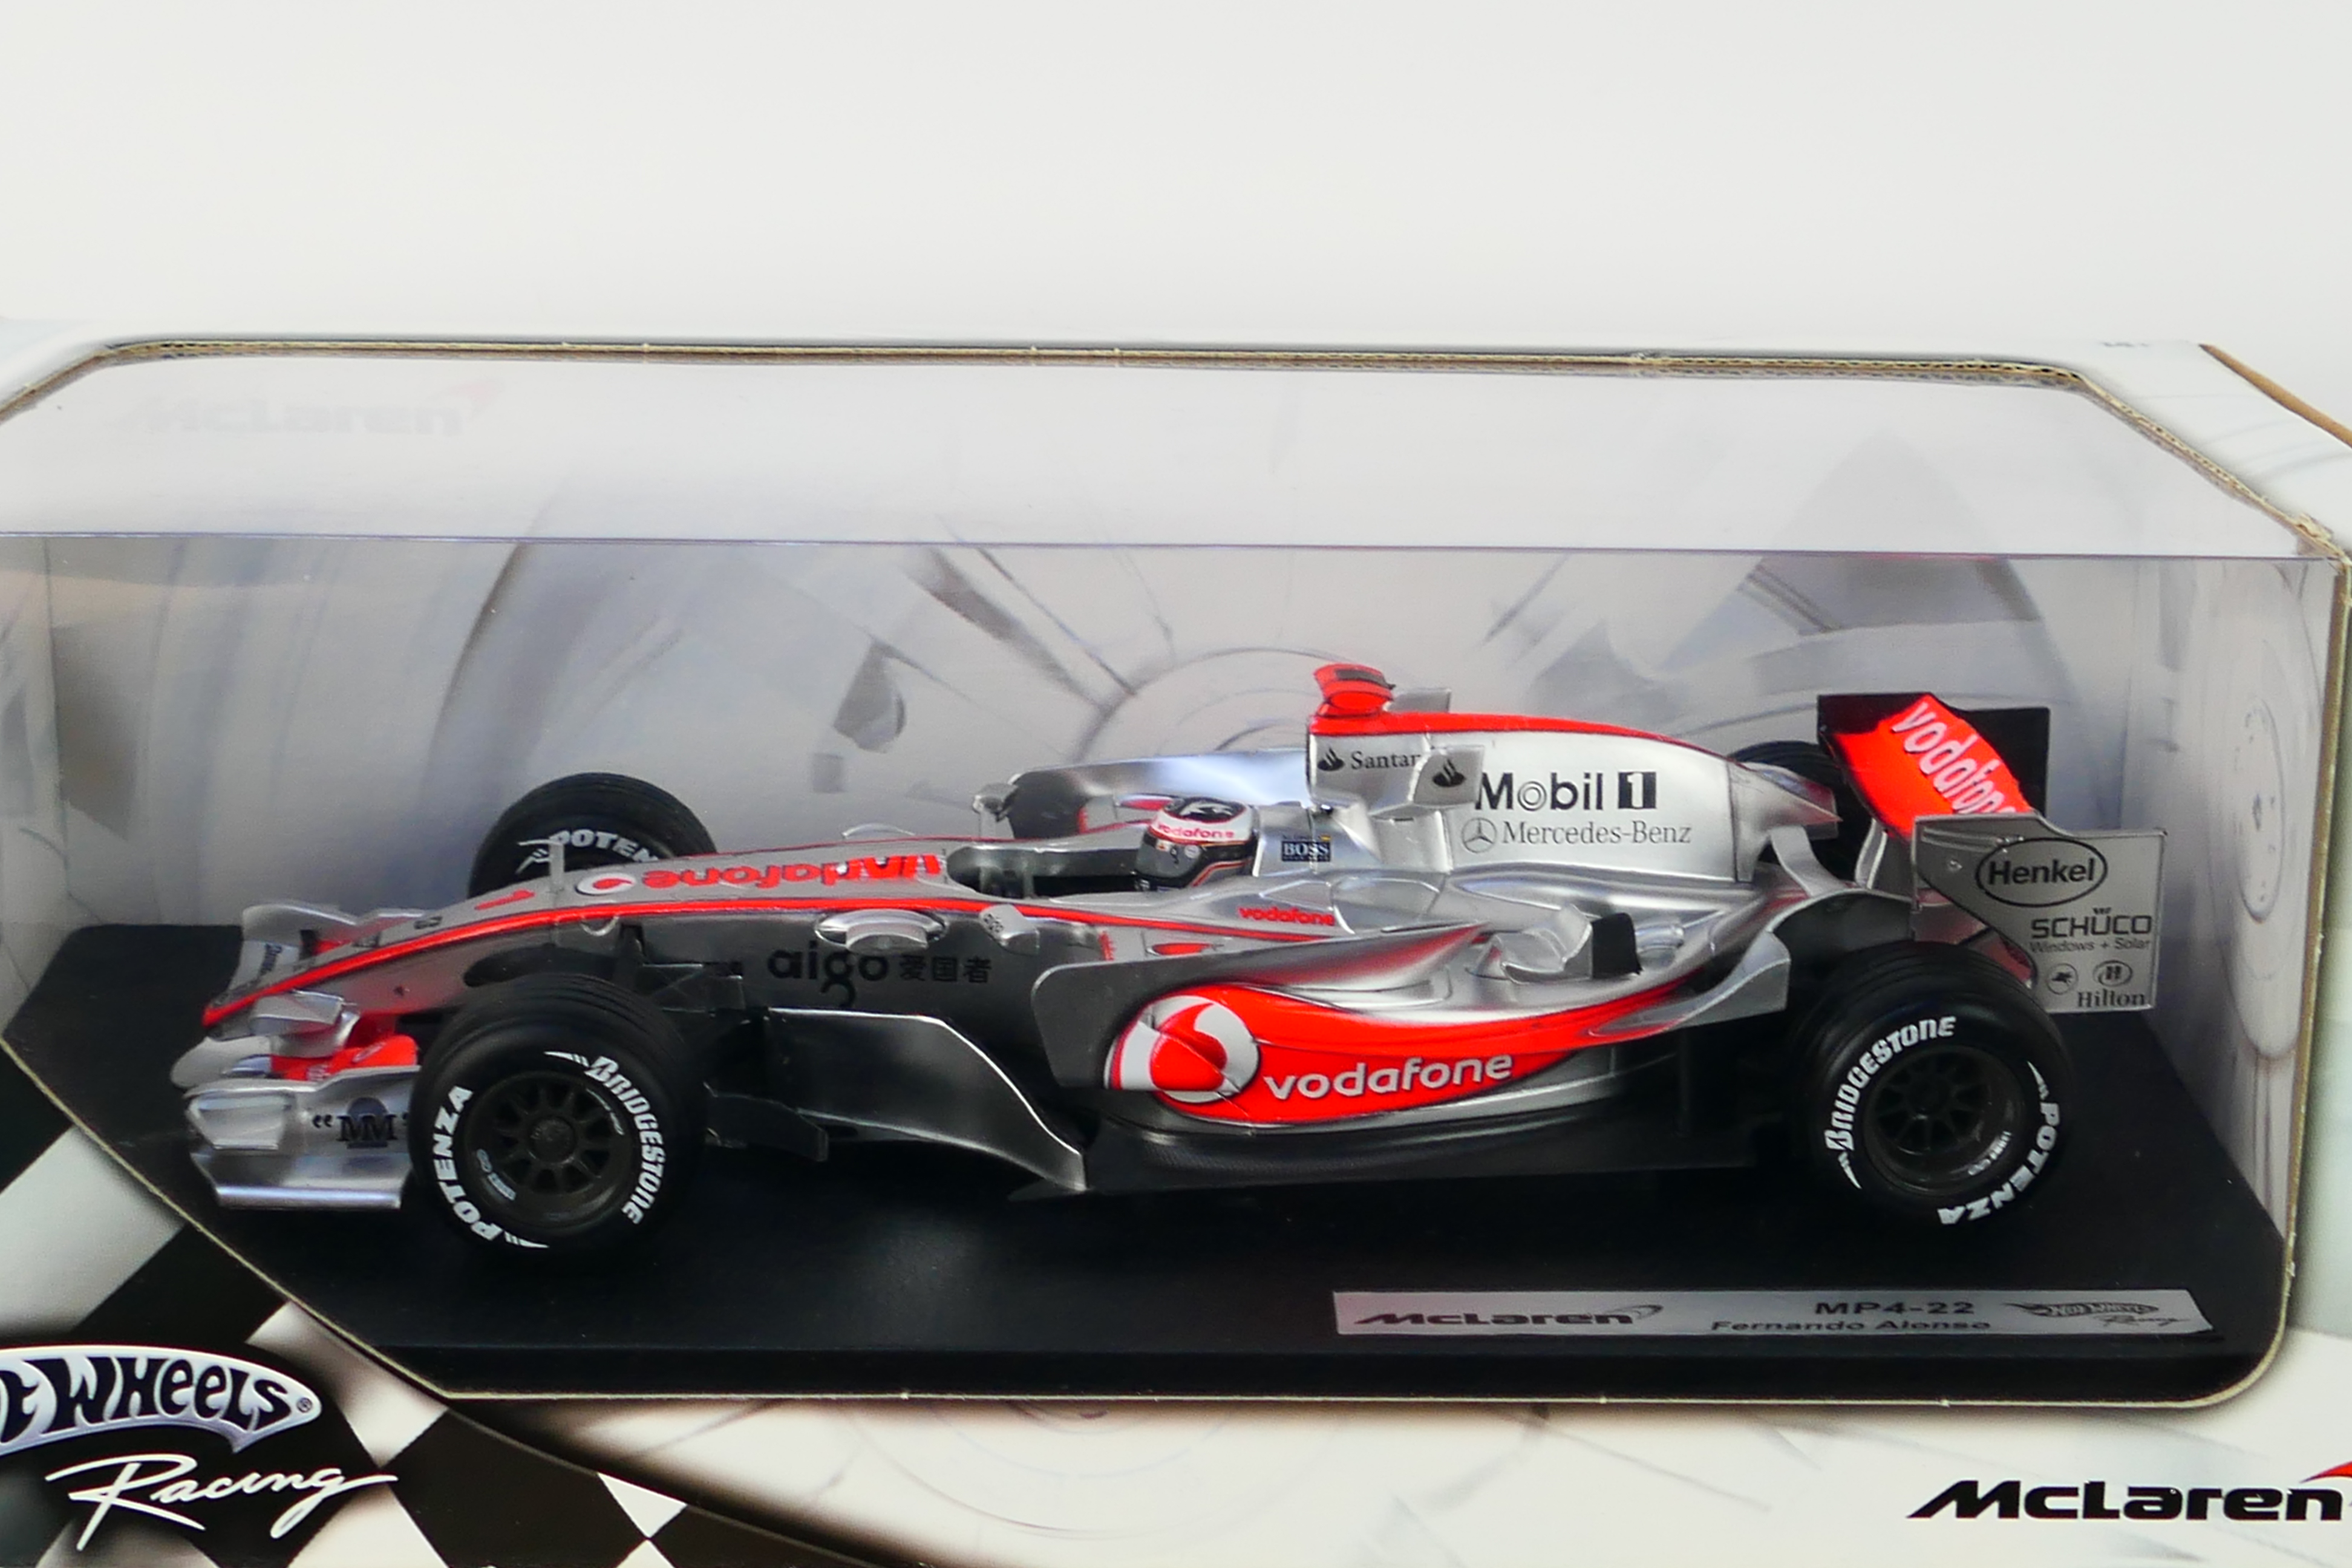 Hot Wheels - A boxed 1:18 scale McLaren MP4-22 Fernando Alonso car which is still factory sealed so - Image 2 of 3